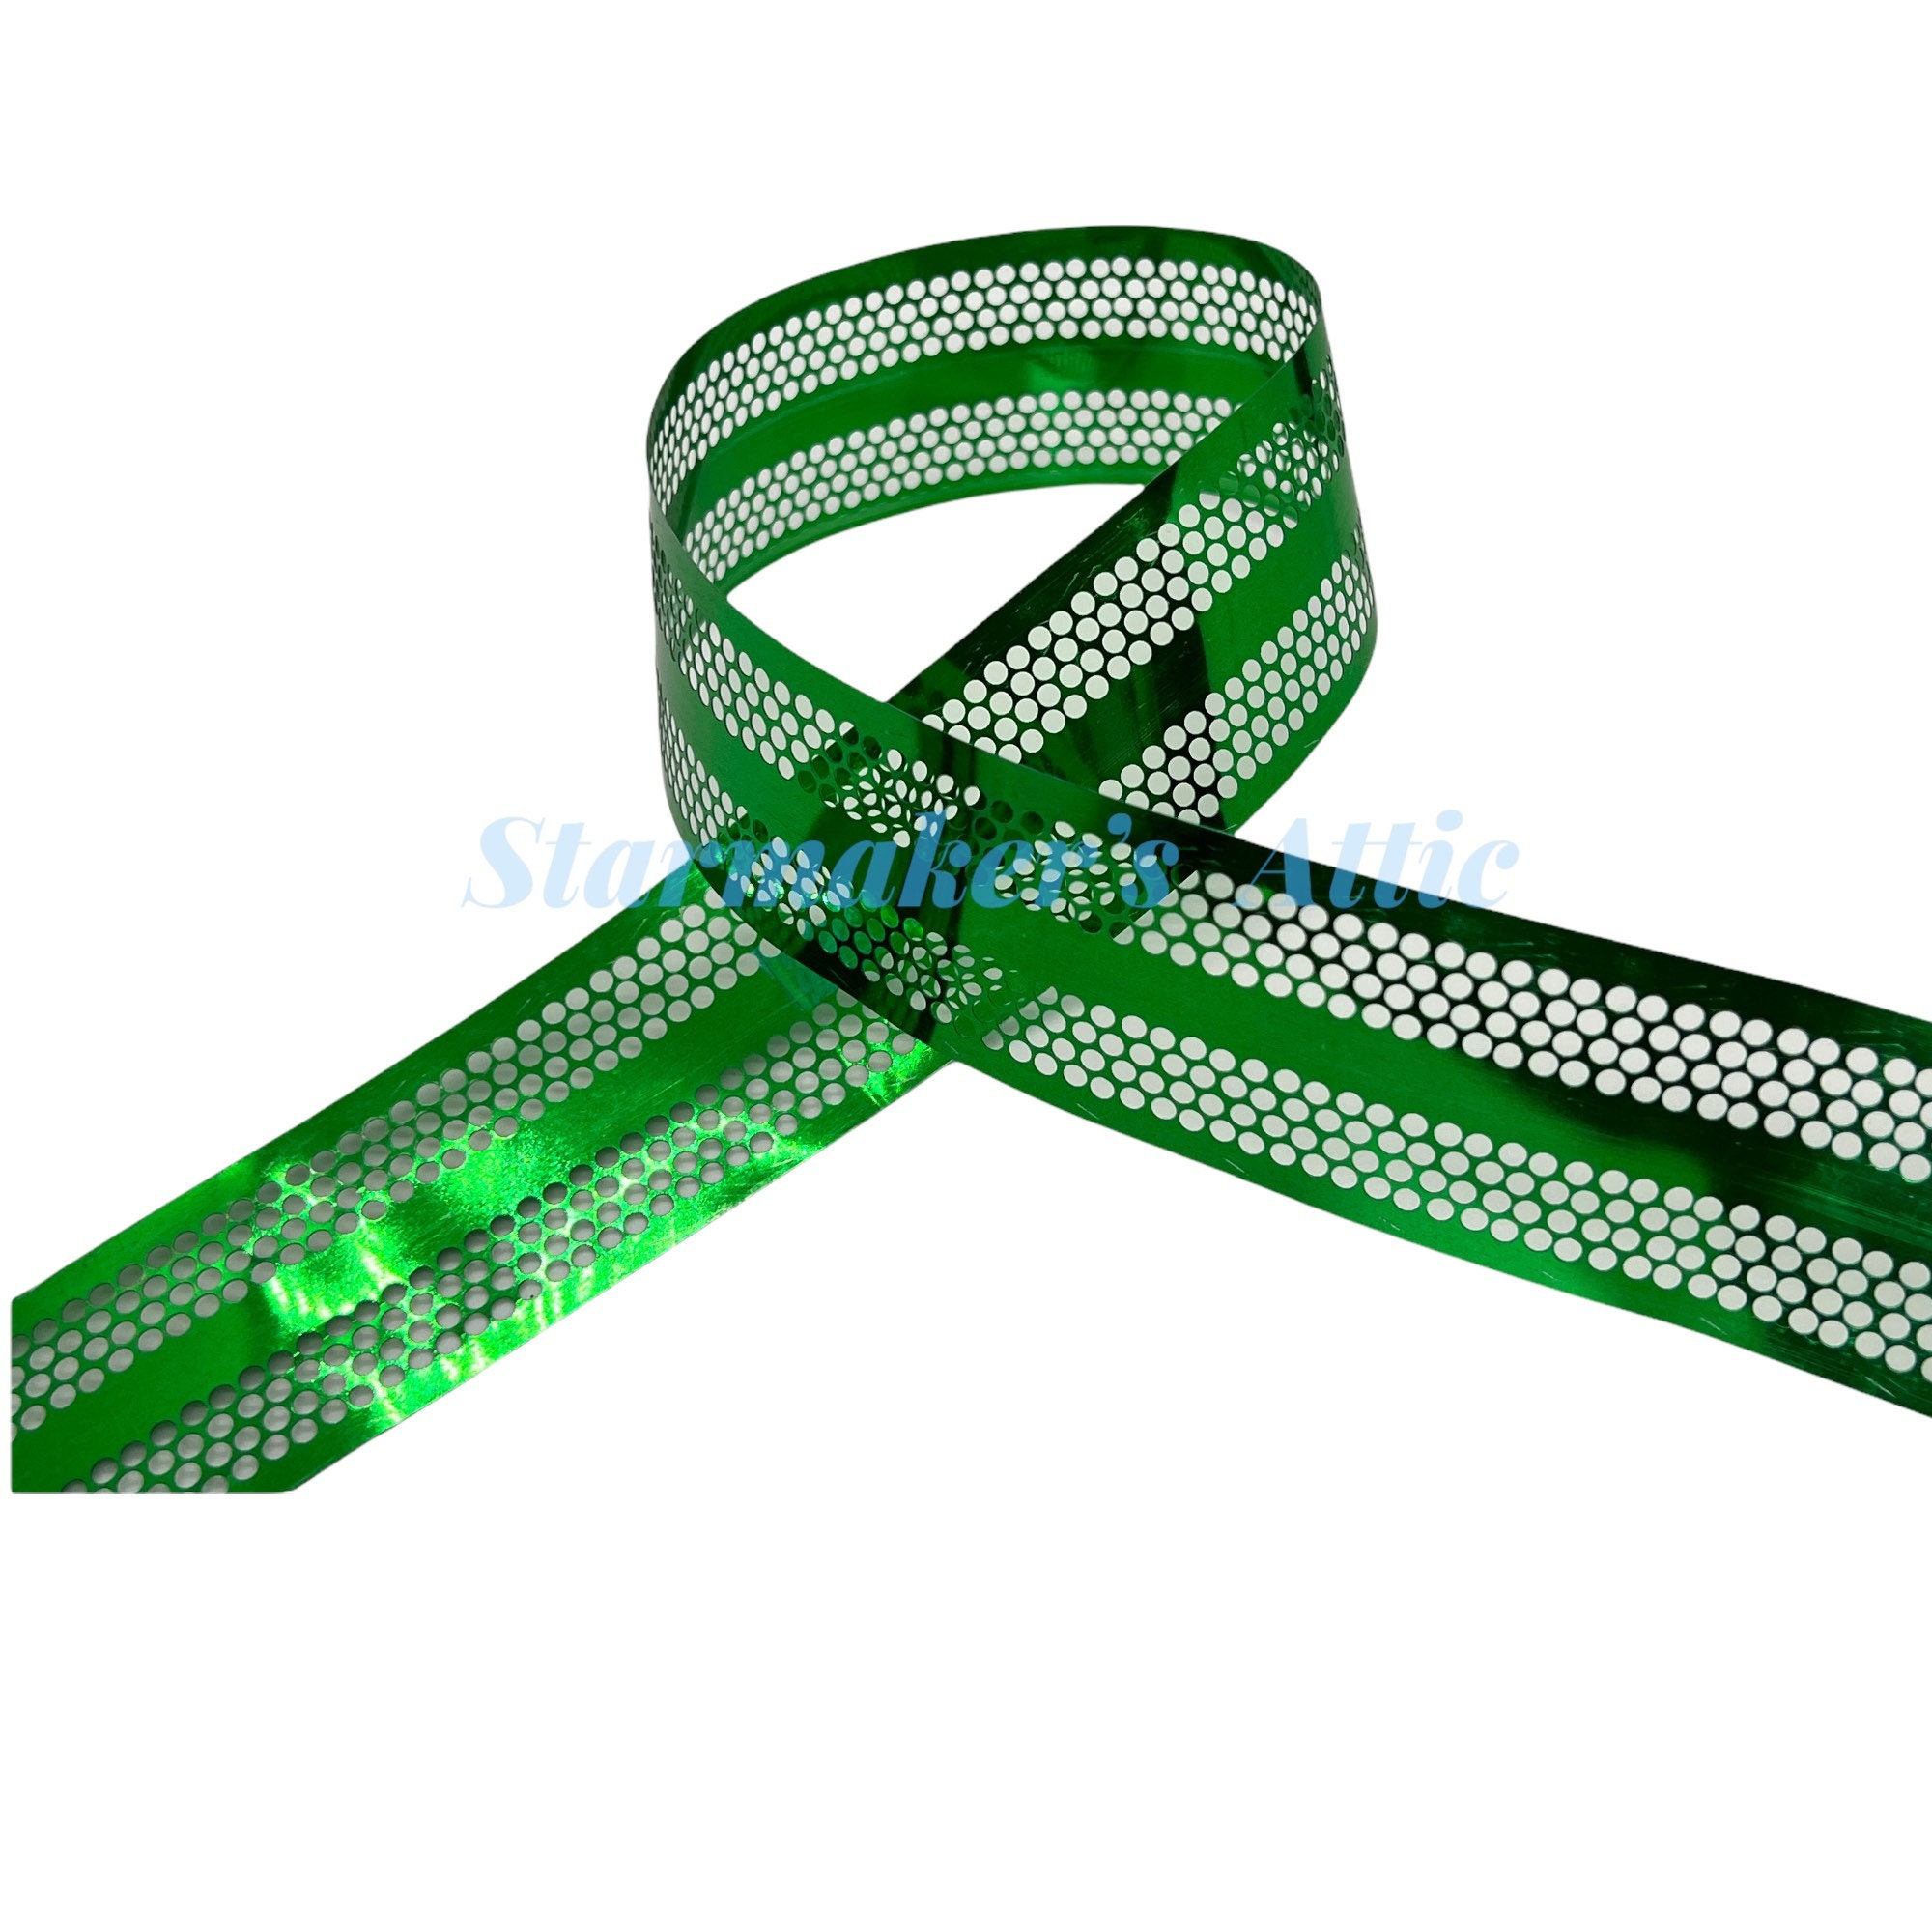 Beautiful 1.5 Inch Punchinette Ribbon in Metallic Red - 5 Yards For Bows,  Wreaths, Decor, Hairbows, St. Patrick's Day, Mardi Gras - Yahoo Shopping